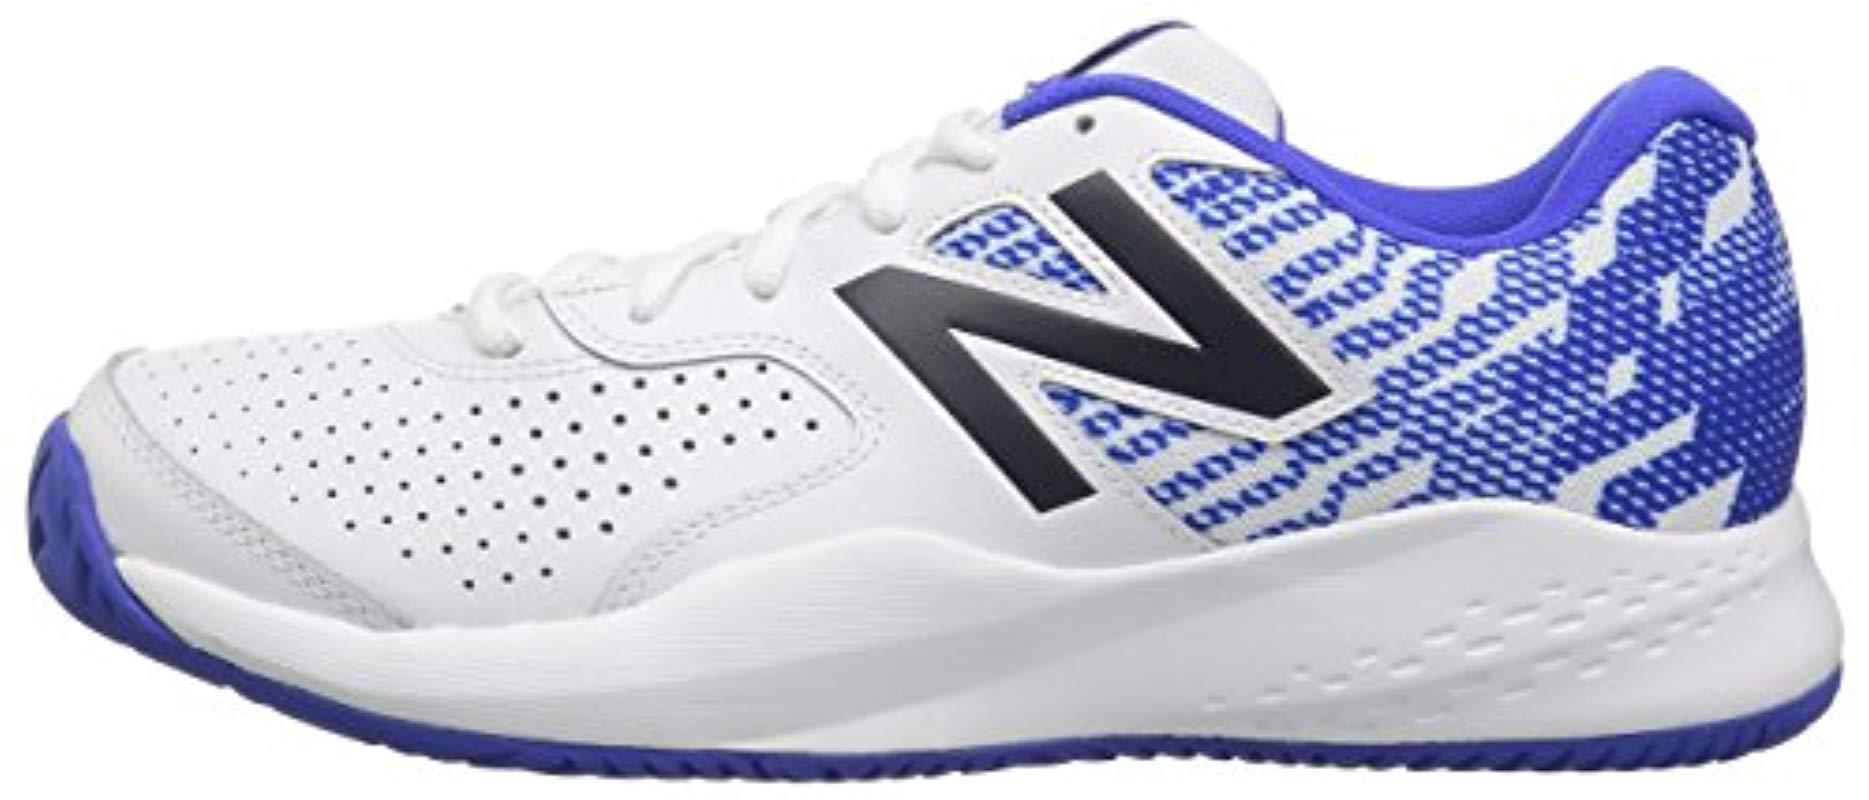 New Balance Leather 696v3 Tennis-shoes 